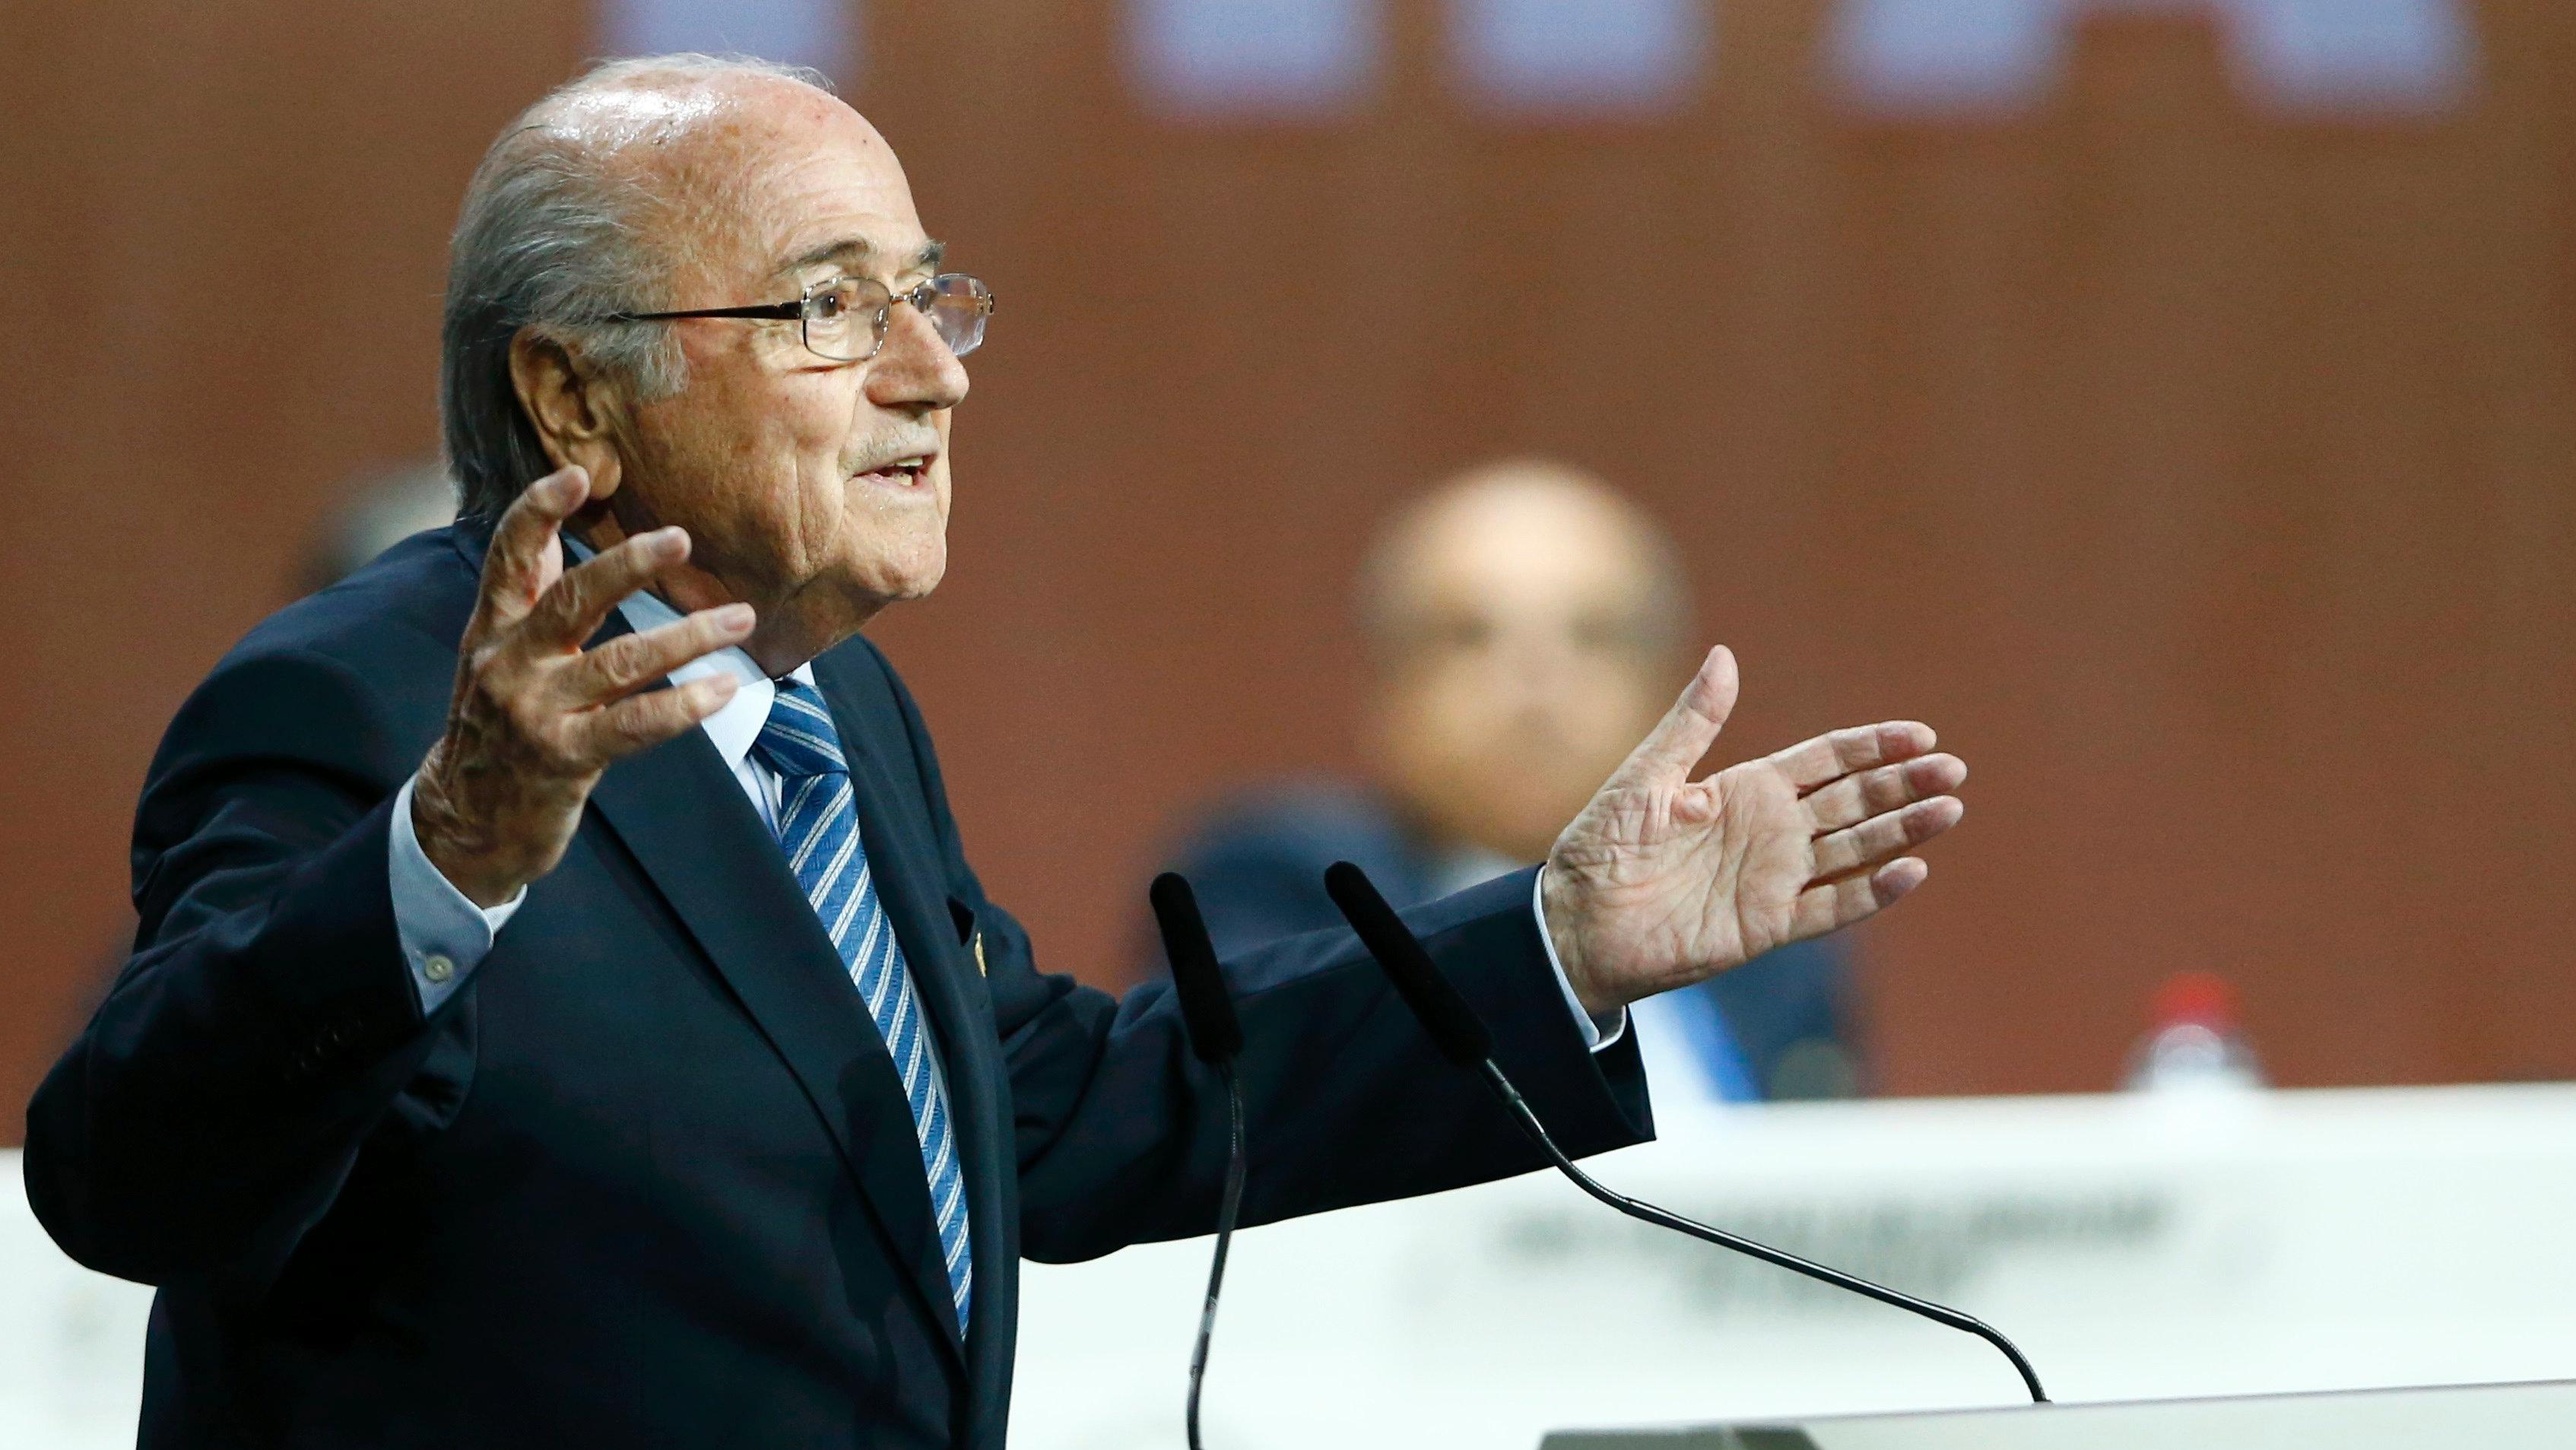 FIFA President Sepp Blatter makes a speech before the election process at the 65th FIFA Congress in Zurich, Switzerland.